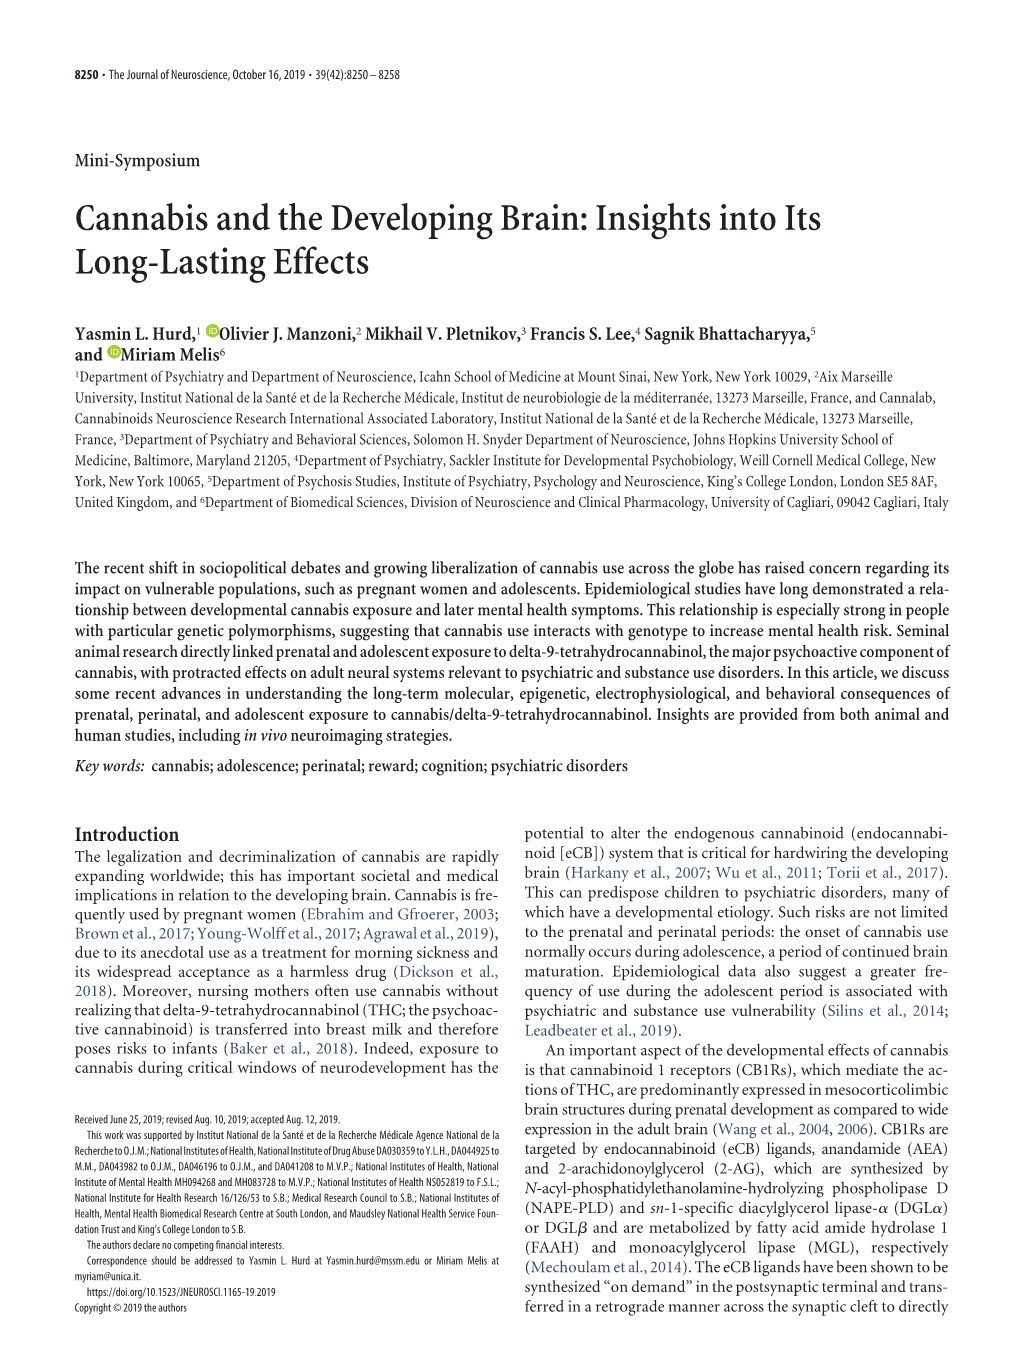 Cannabis and the Developing Brain: Insights Into Its Long-Lasting Effects